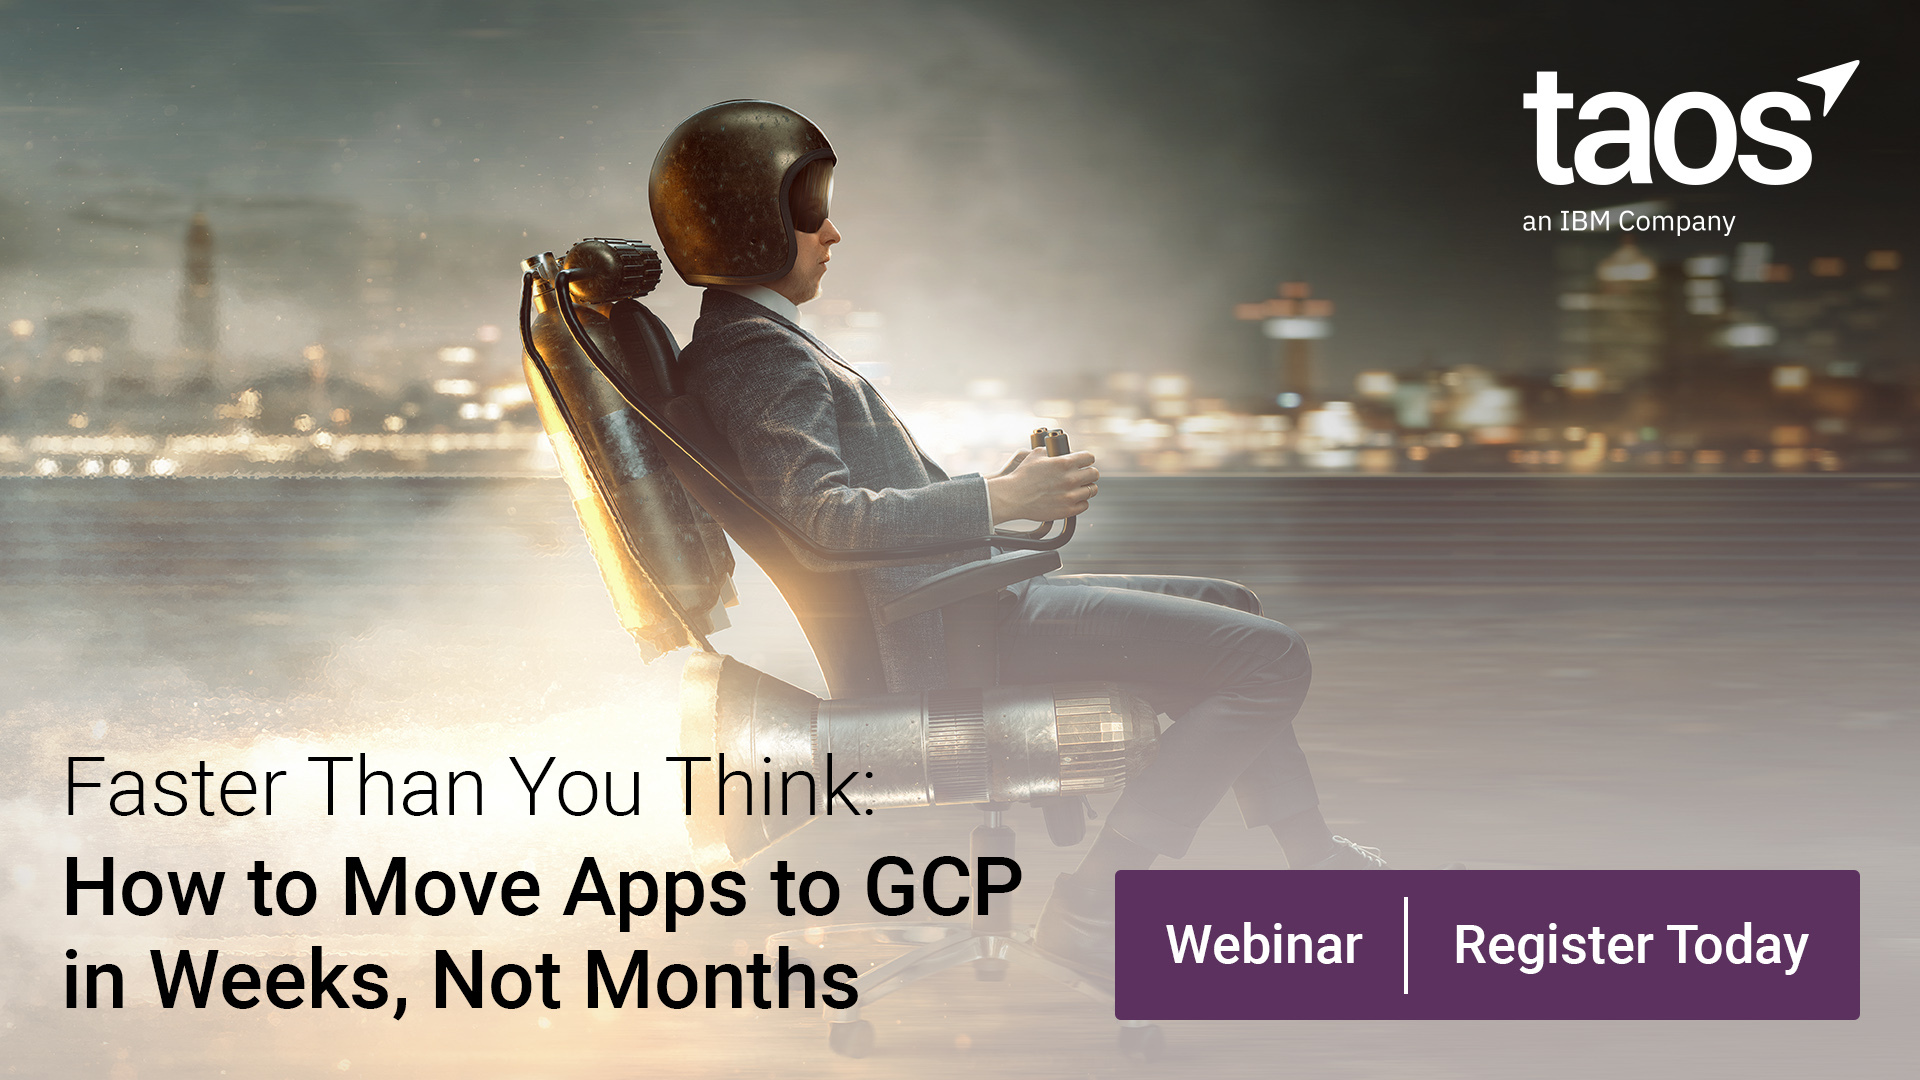 Faster Than You Think: How to Move Apps to GCP in Weeks, Not Months